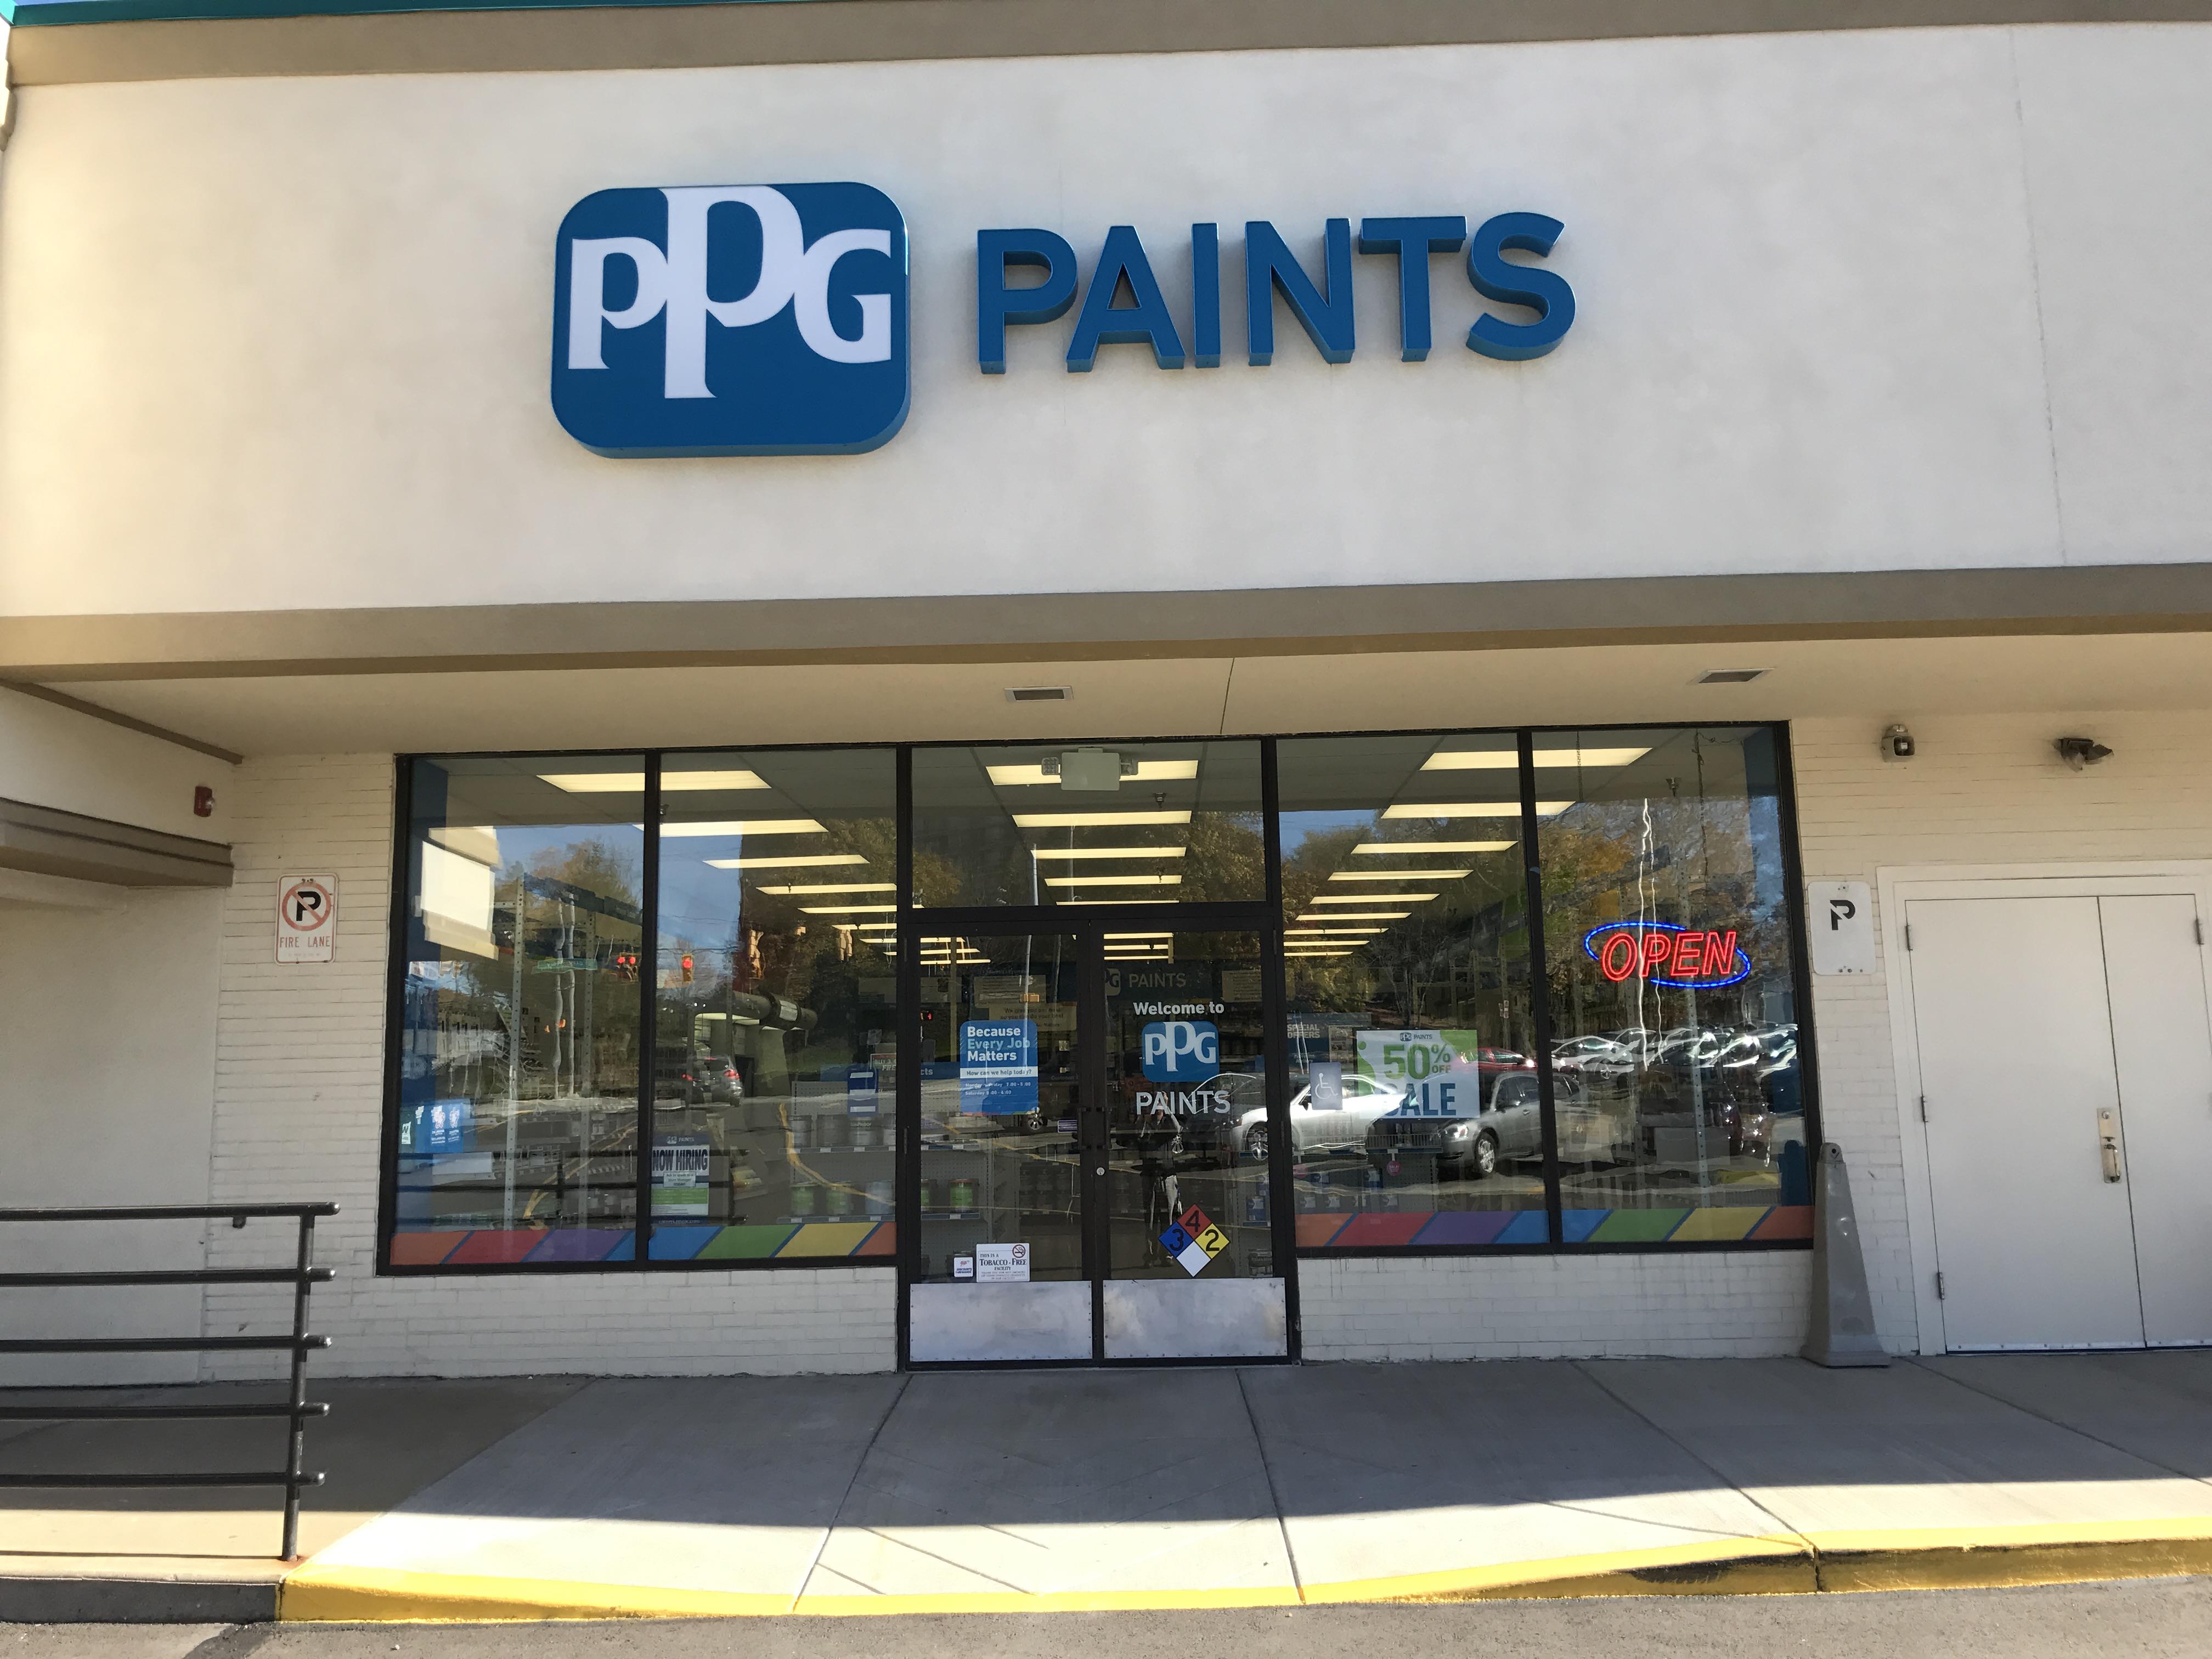 How can you find stores that sell Pittsburgh Paints?